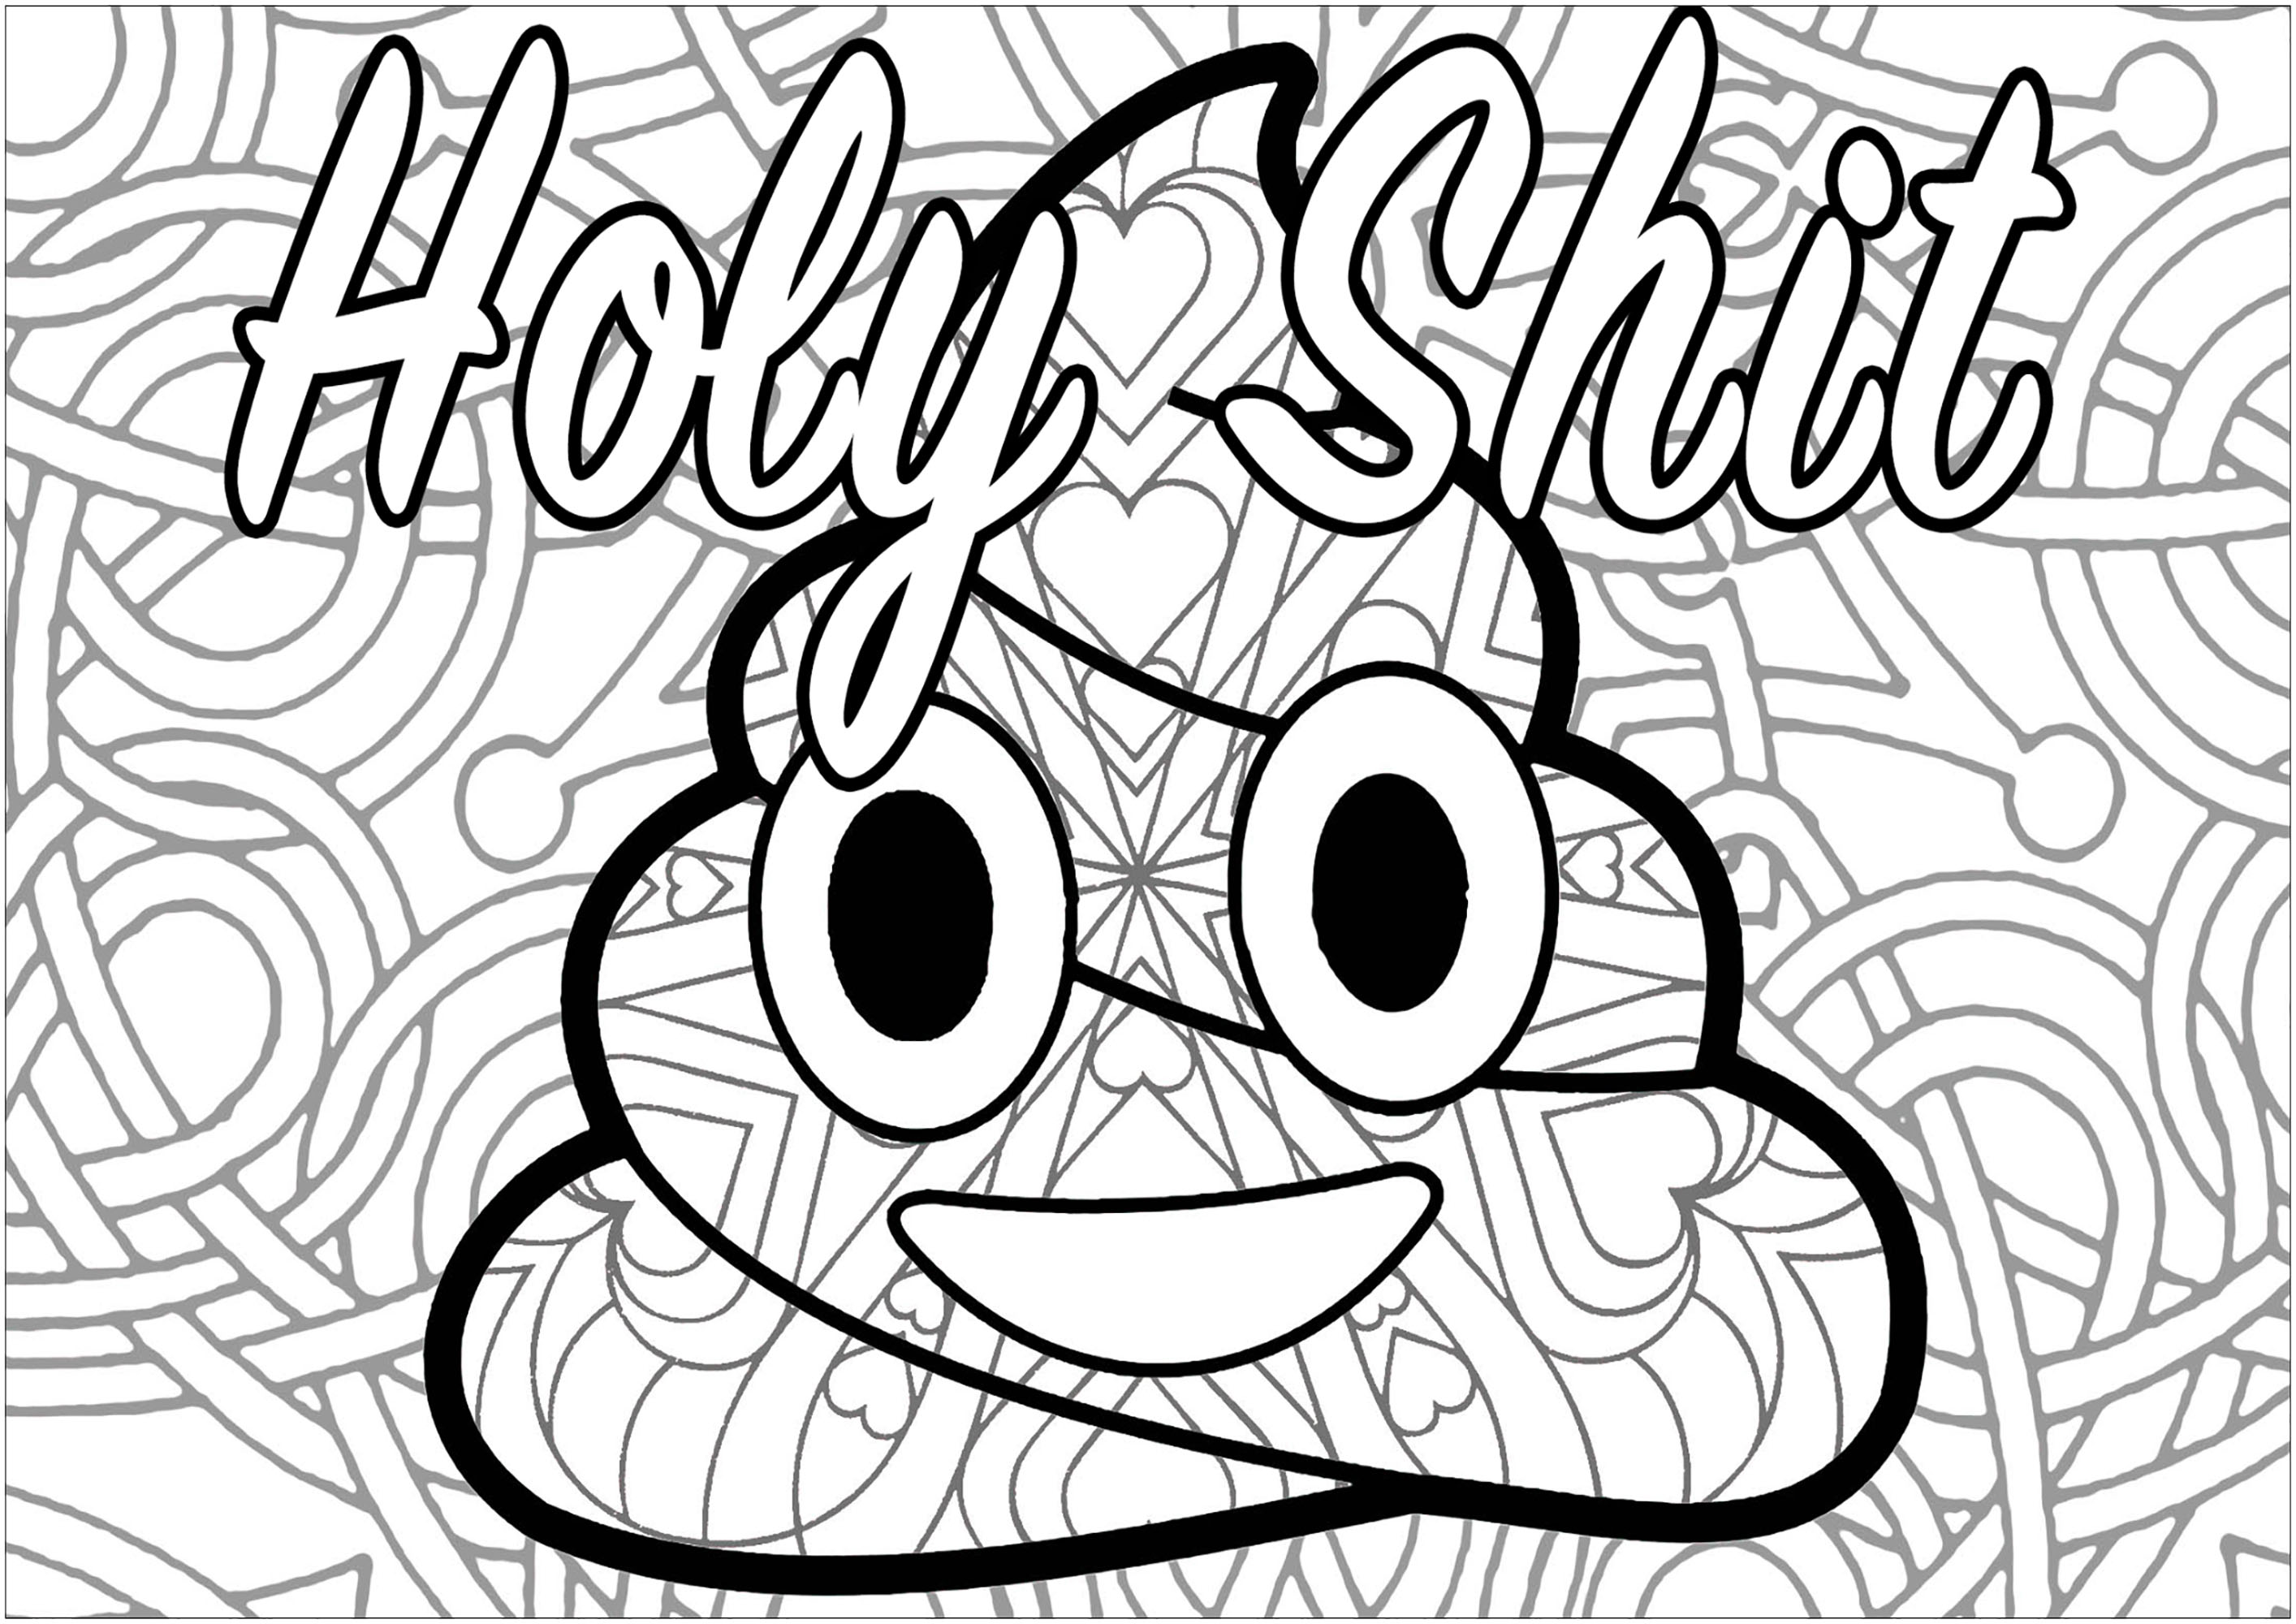 Holy Shit : Swear word coloring page with Pile of Poo emoji